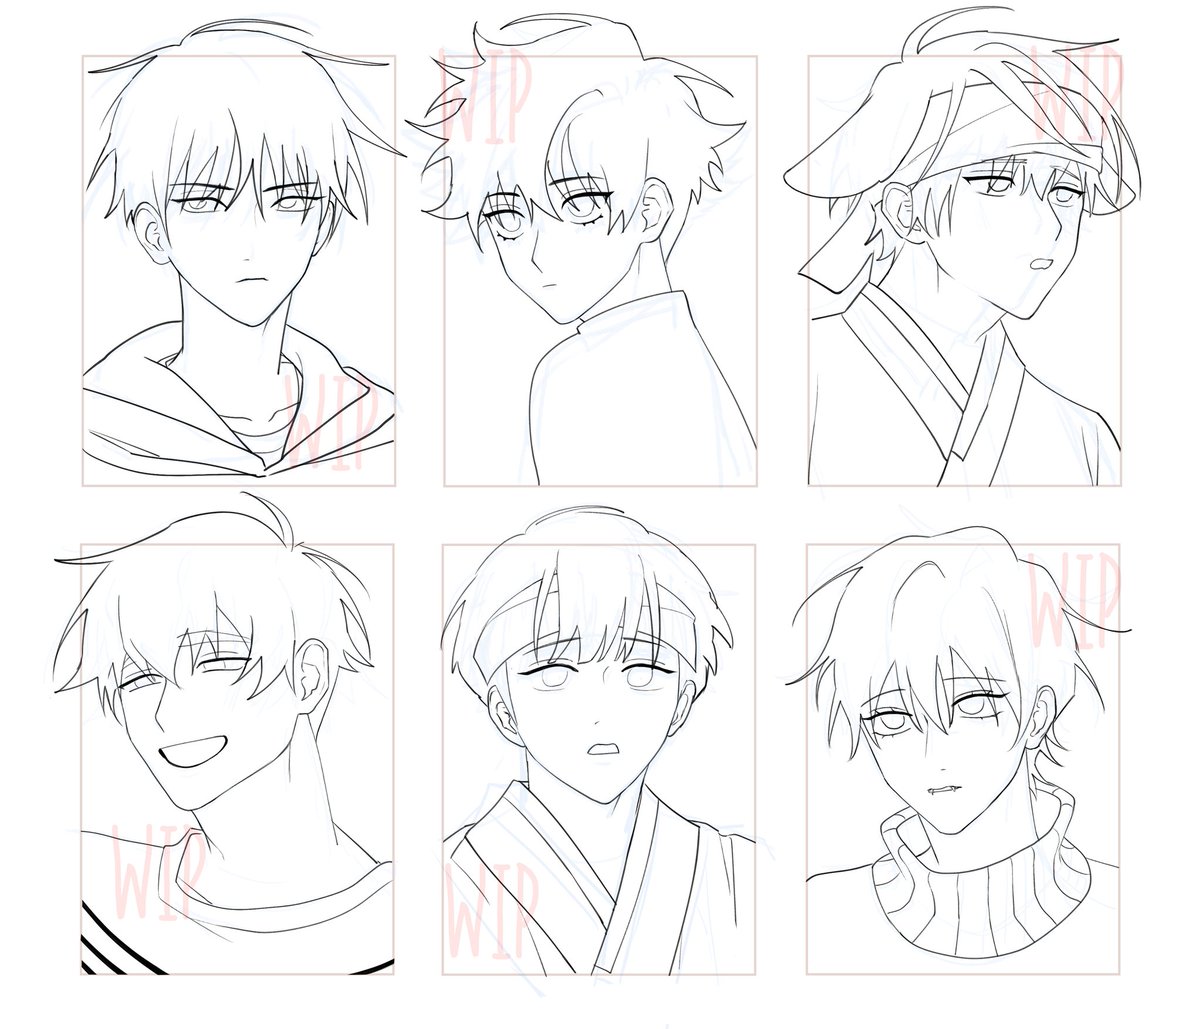 i think i can tell who all these are at least 75% i'm so proud of myself kudos if u can tell too 